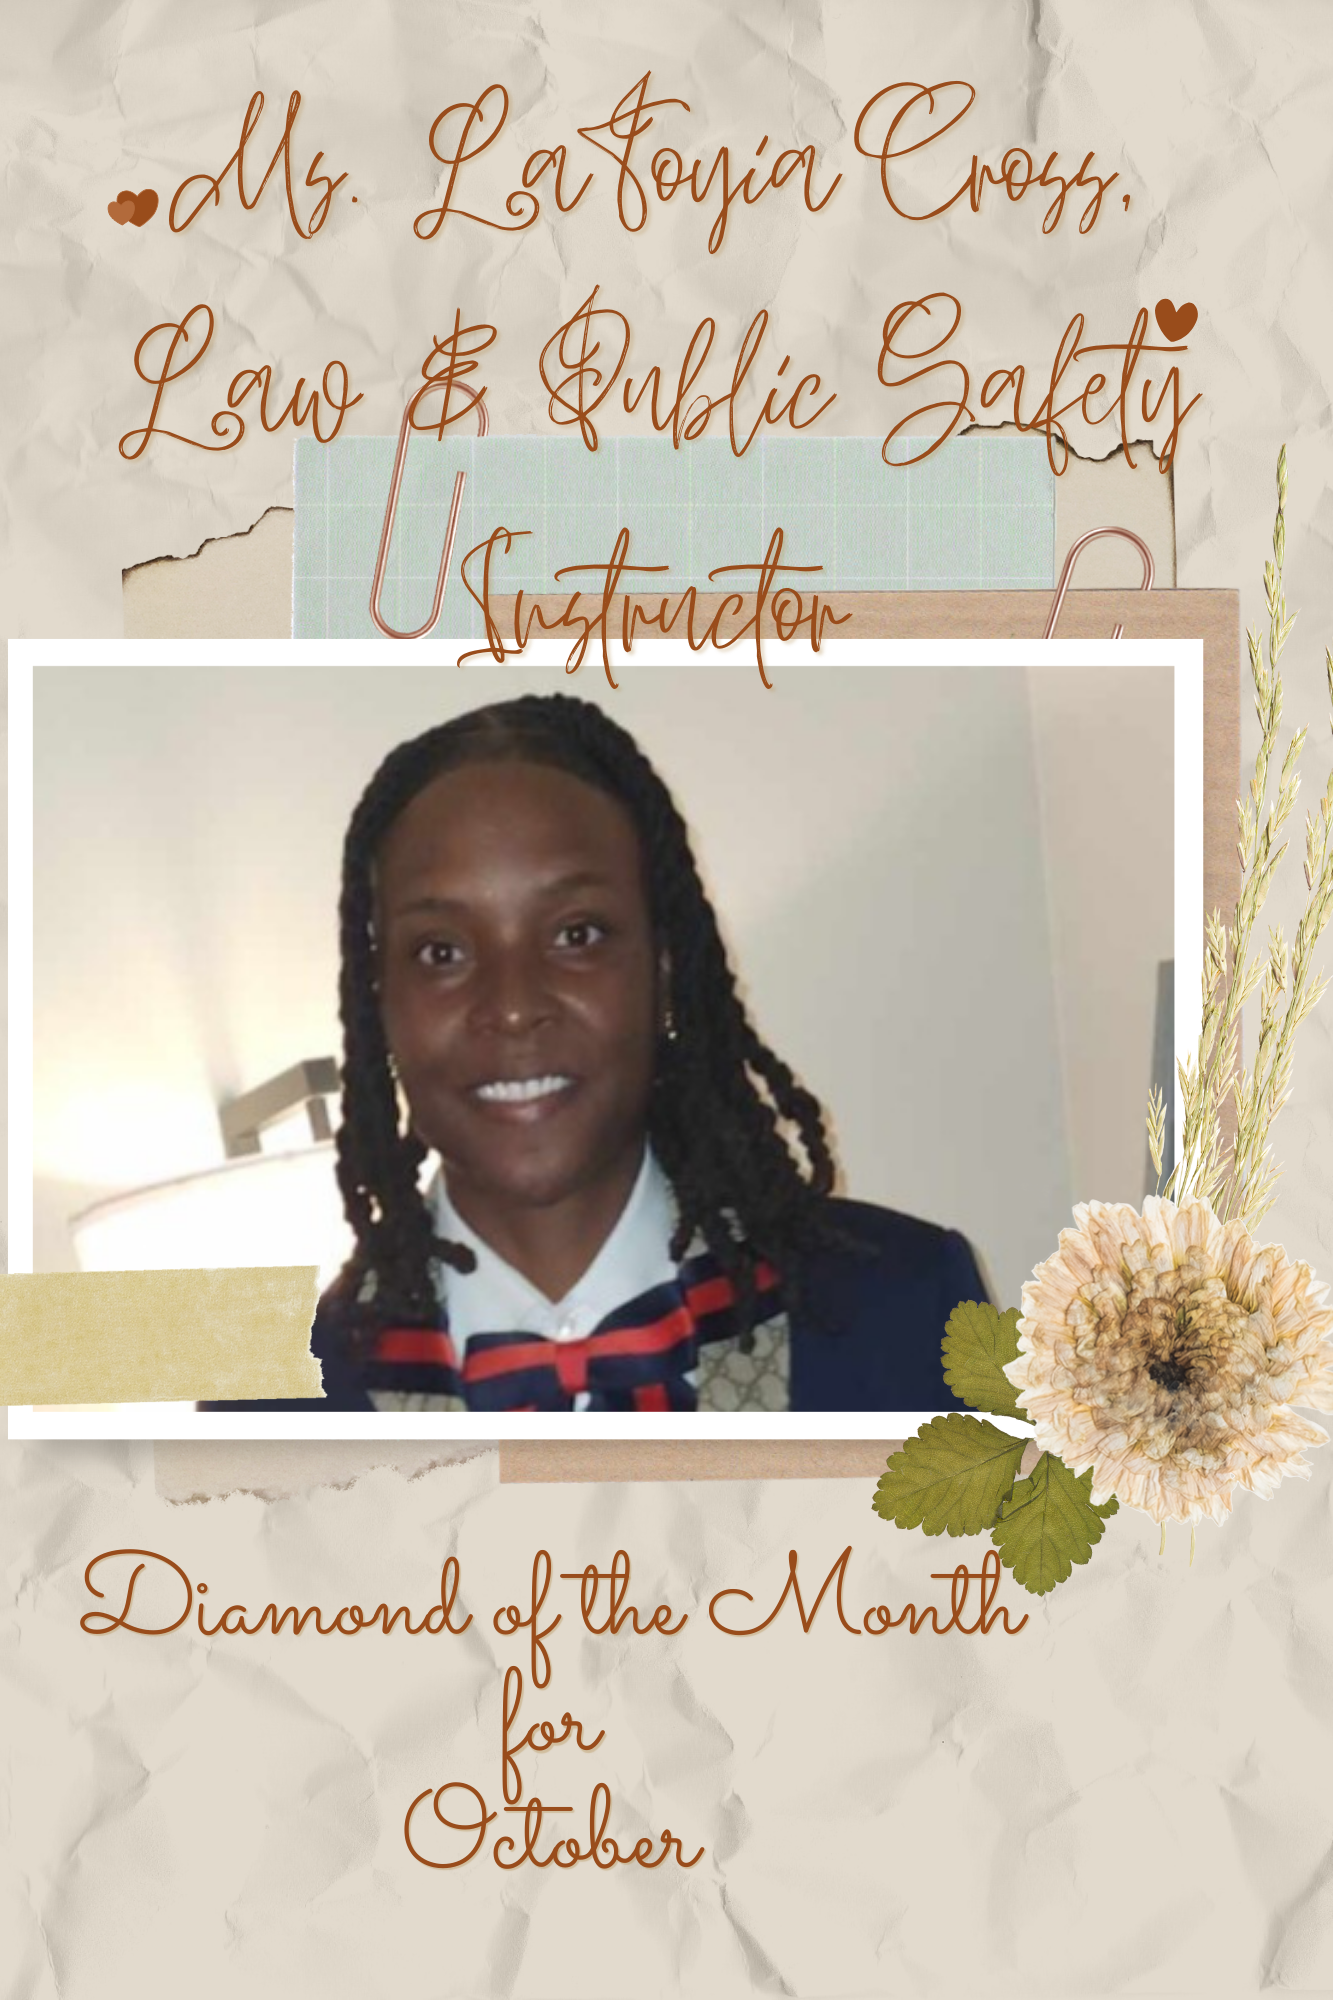 Ms. Latoyia Cross, Law & Public Safety Instructor Diamond of the Month for October